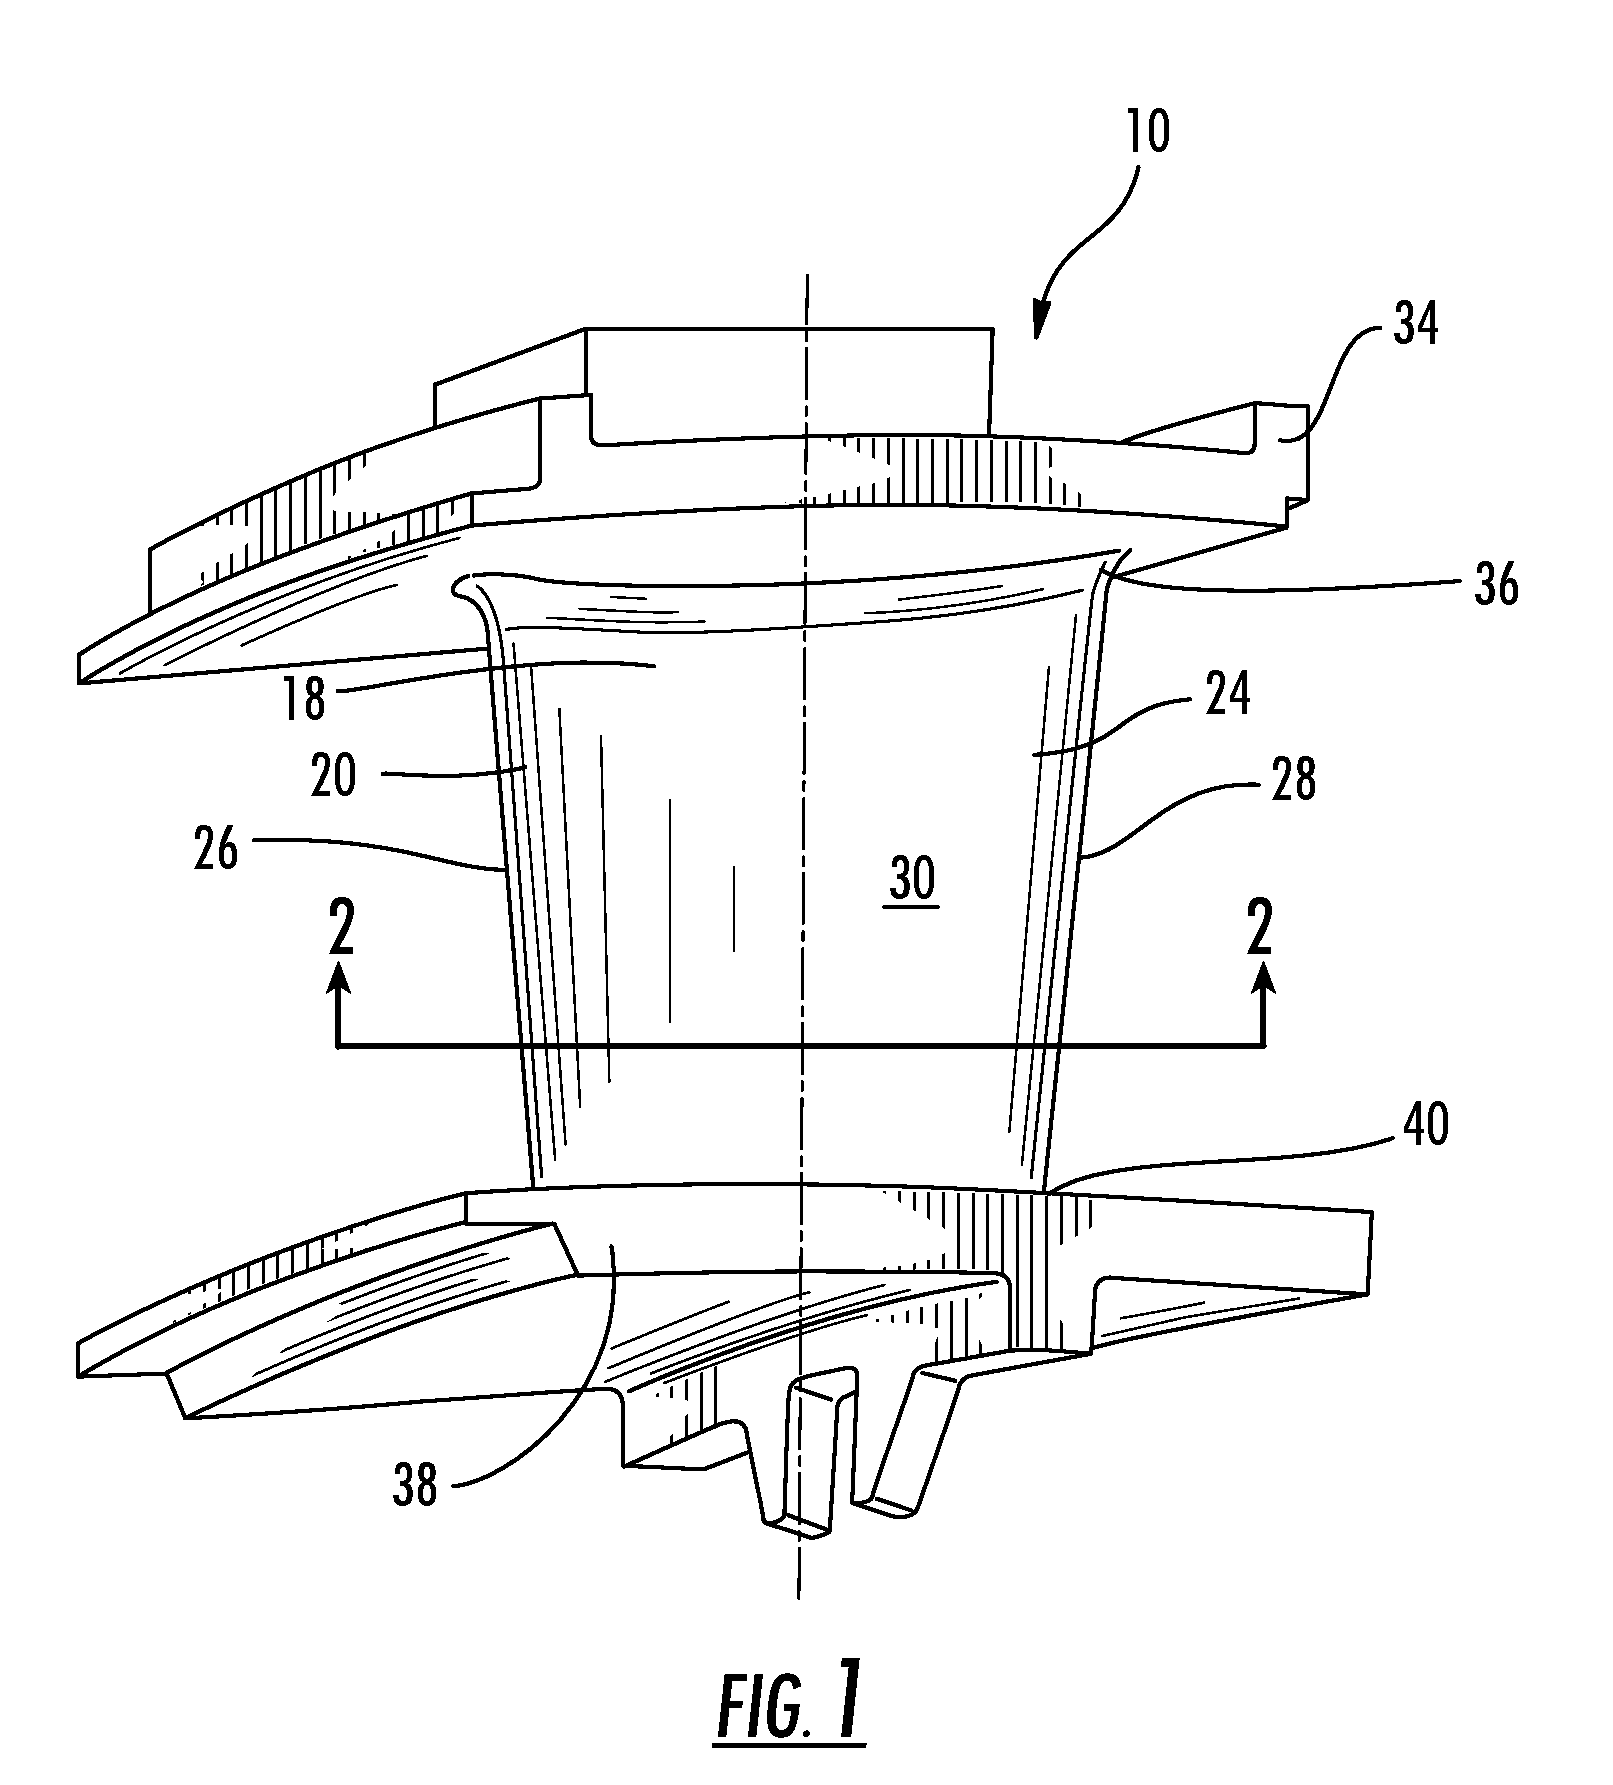 Turbine airfoil with a compliant outer wall